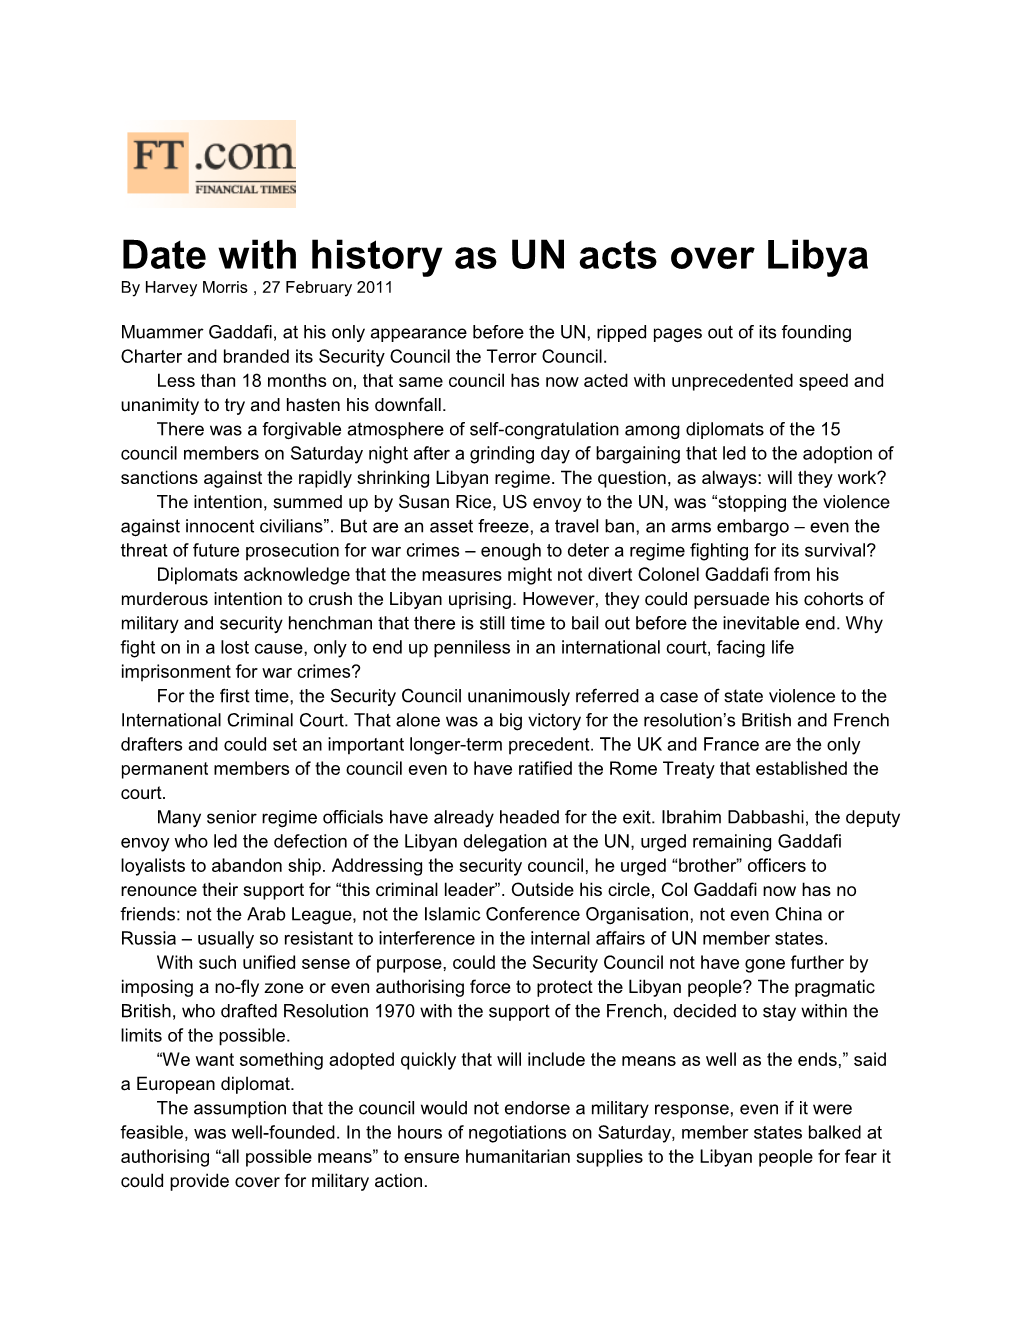 Date with History As UN Acts Over Libya by Harvey Morris , 27 February 2011